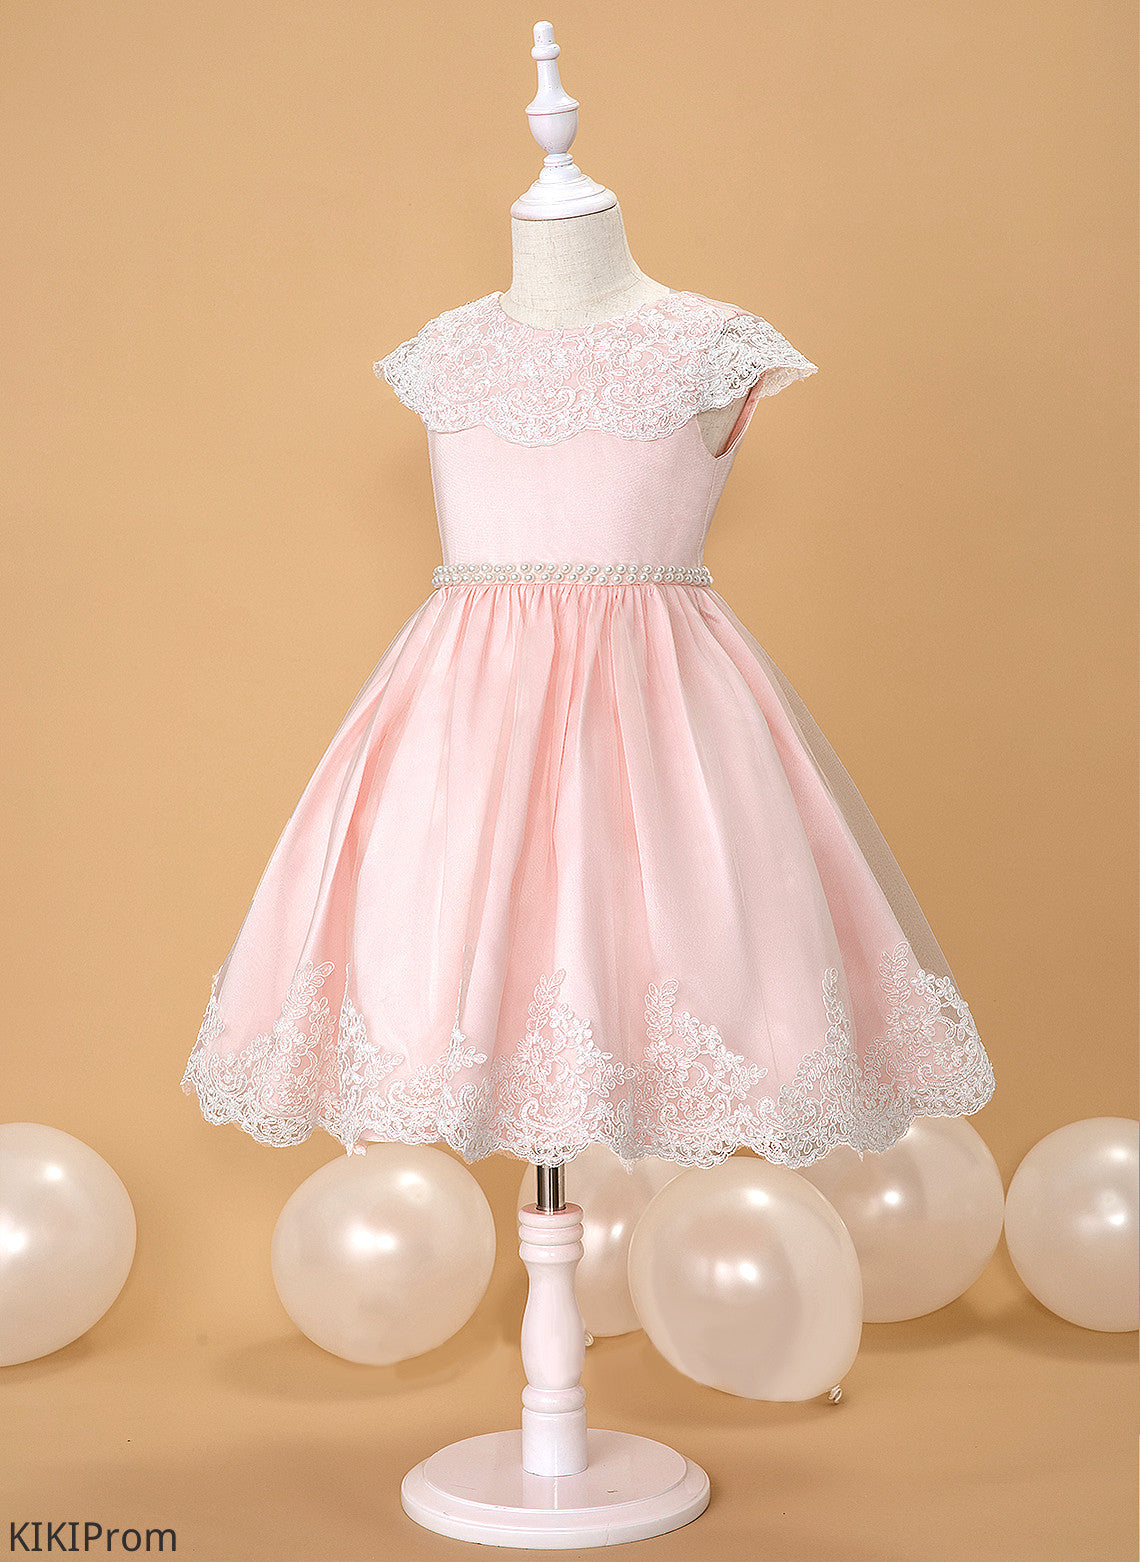 Reagan Sleeveless Dress Ball-Gown/Princess Neck - Flower Girl Knee-length Flower Girl Dresses Beading/Bow(s) Scoop Satin/Lace With